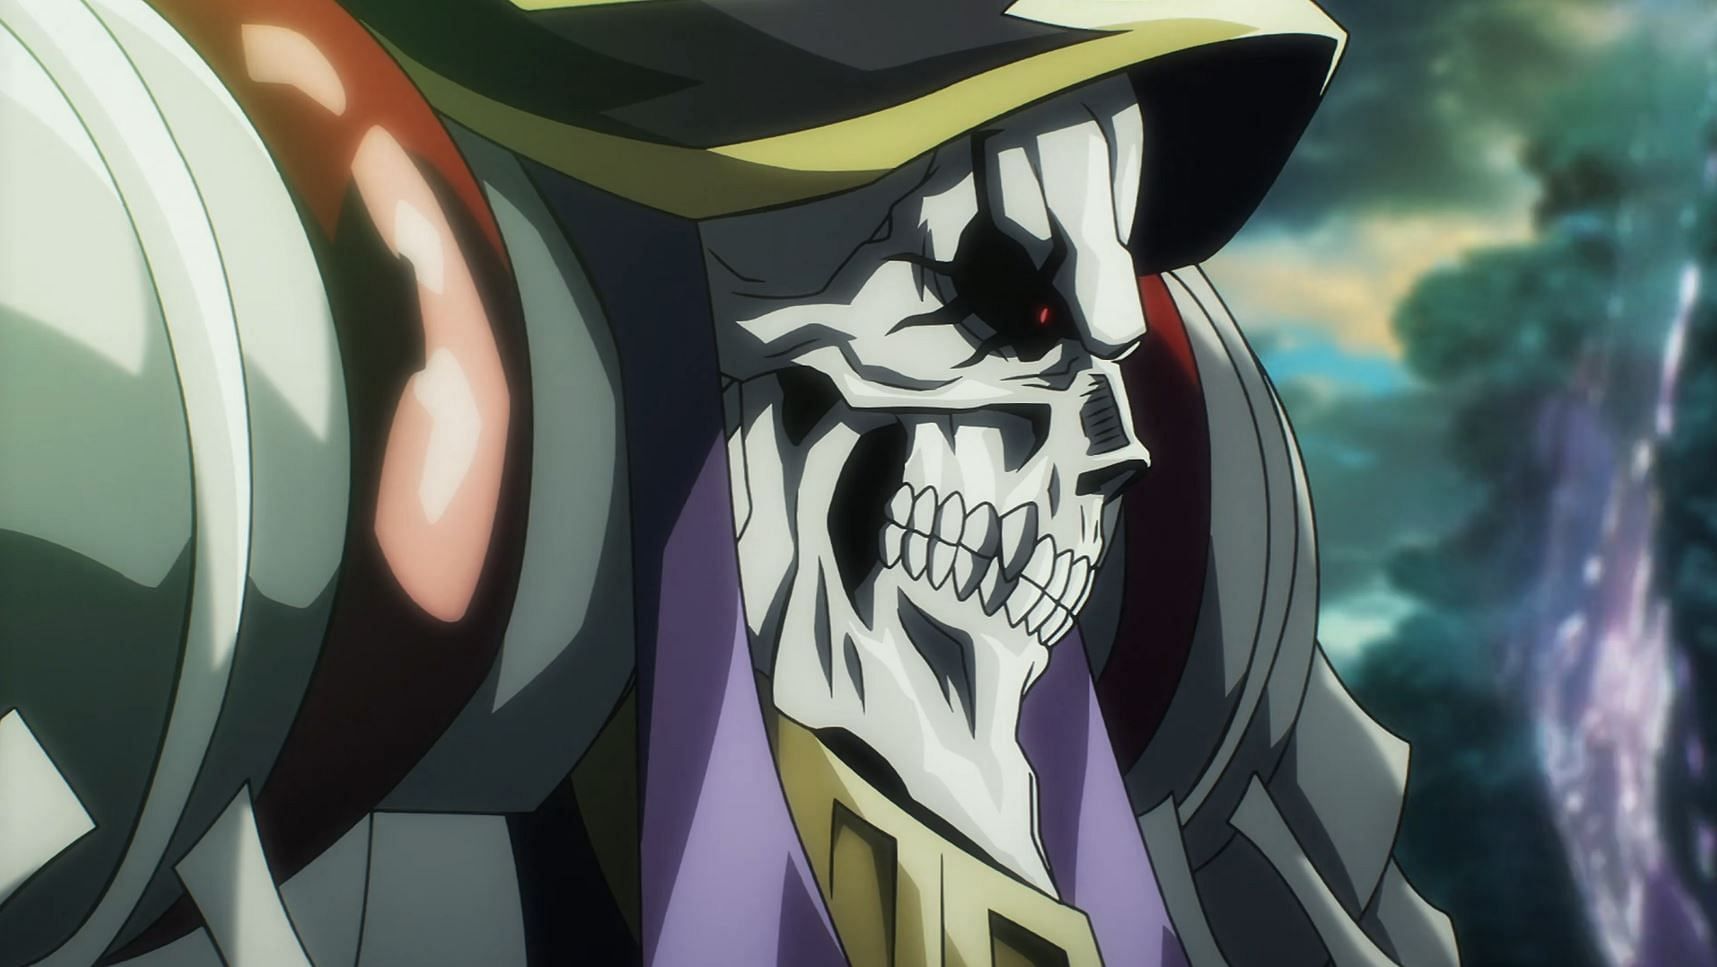 Overlord Season 4 Episode 13 Release Date & Time